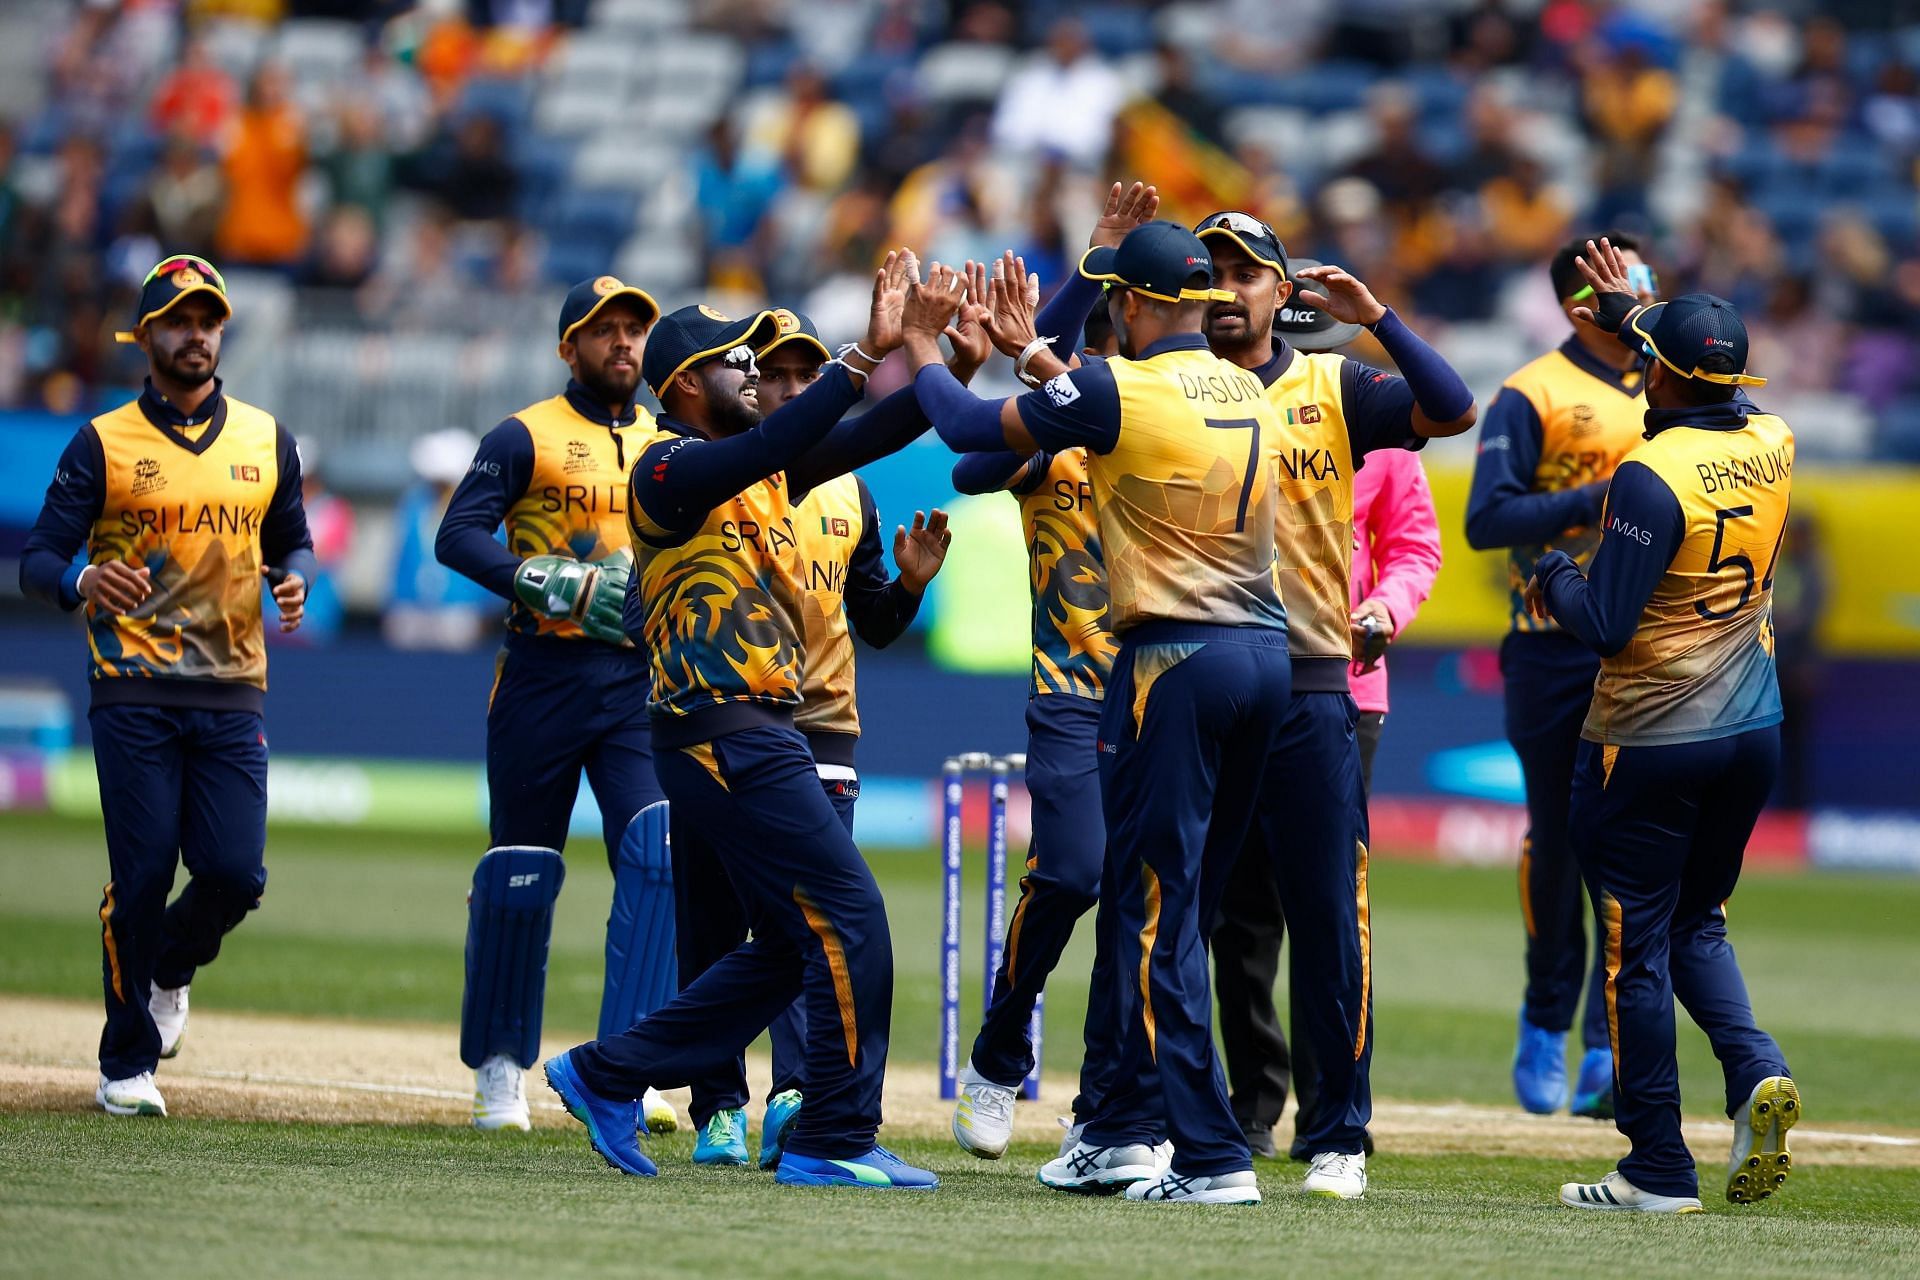 Sri Lanka will be keen to open their account in the points table tomorrow (Image: ICC/Twitter)